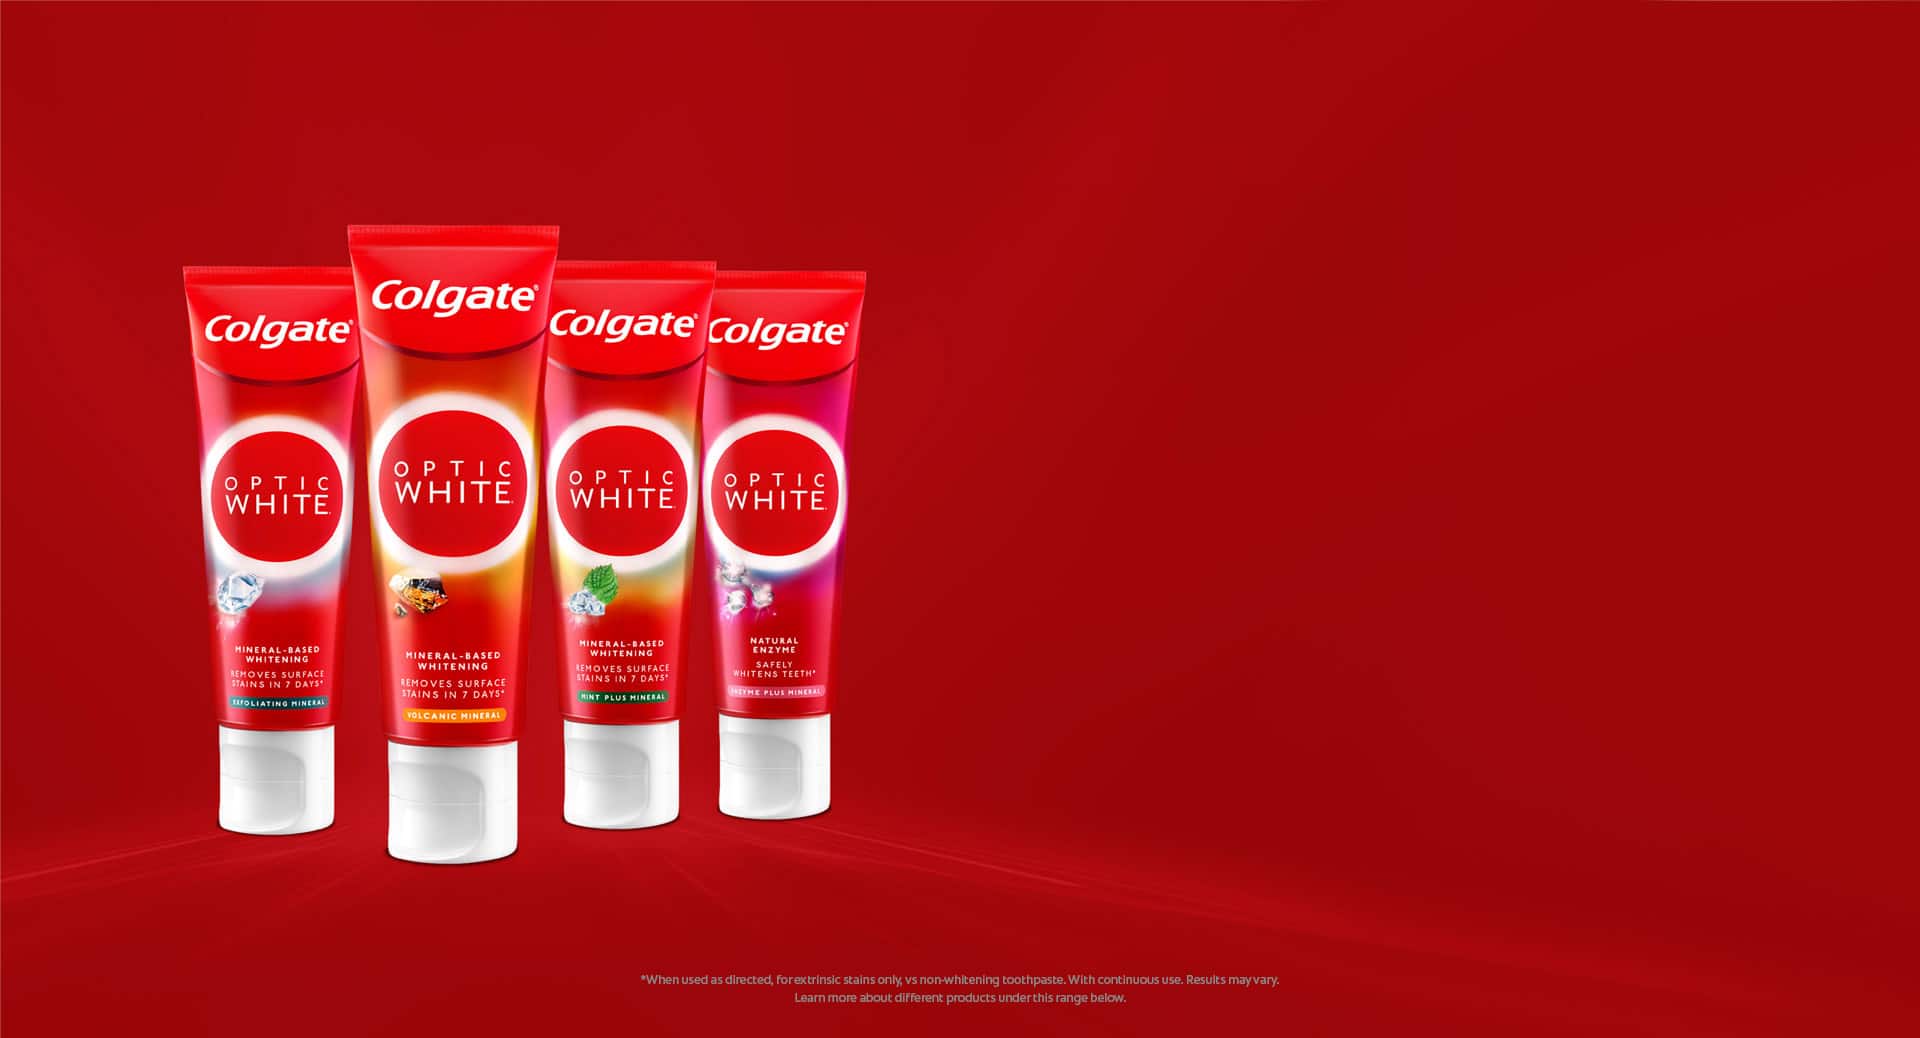 4 types of Colgate's Optic White Toothpaste; exfoliating mineral,volcanic mineral,mint plus mineral and enzyme plus mineral